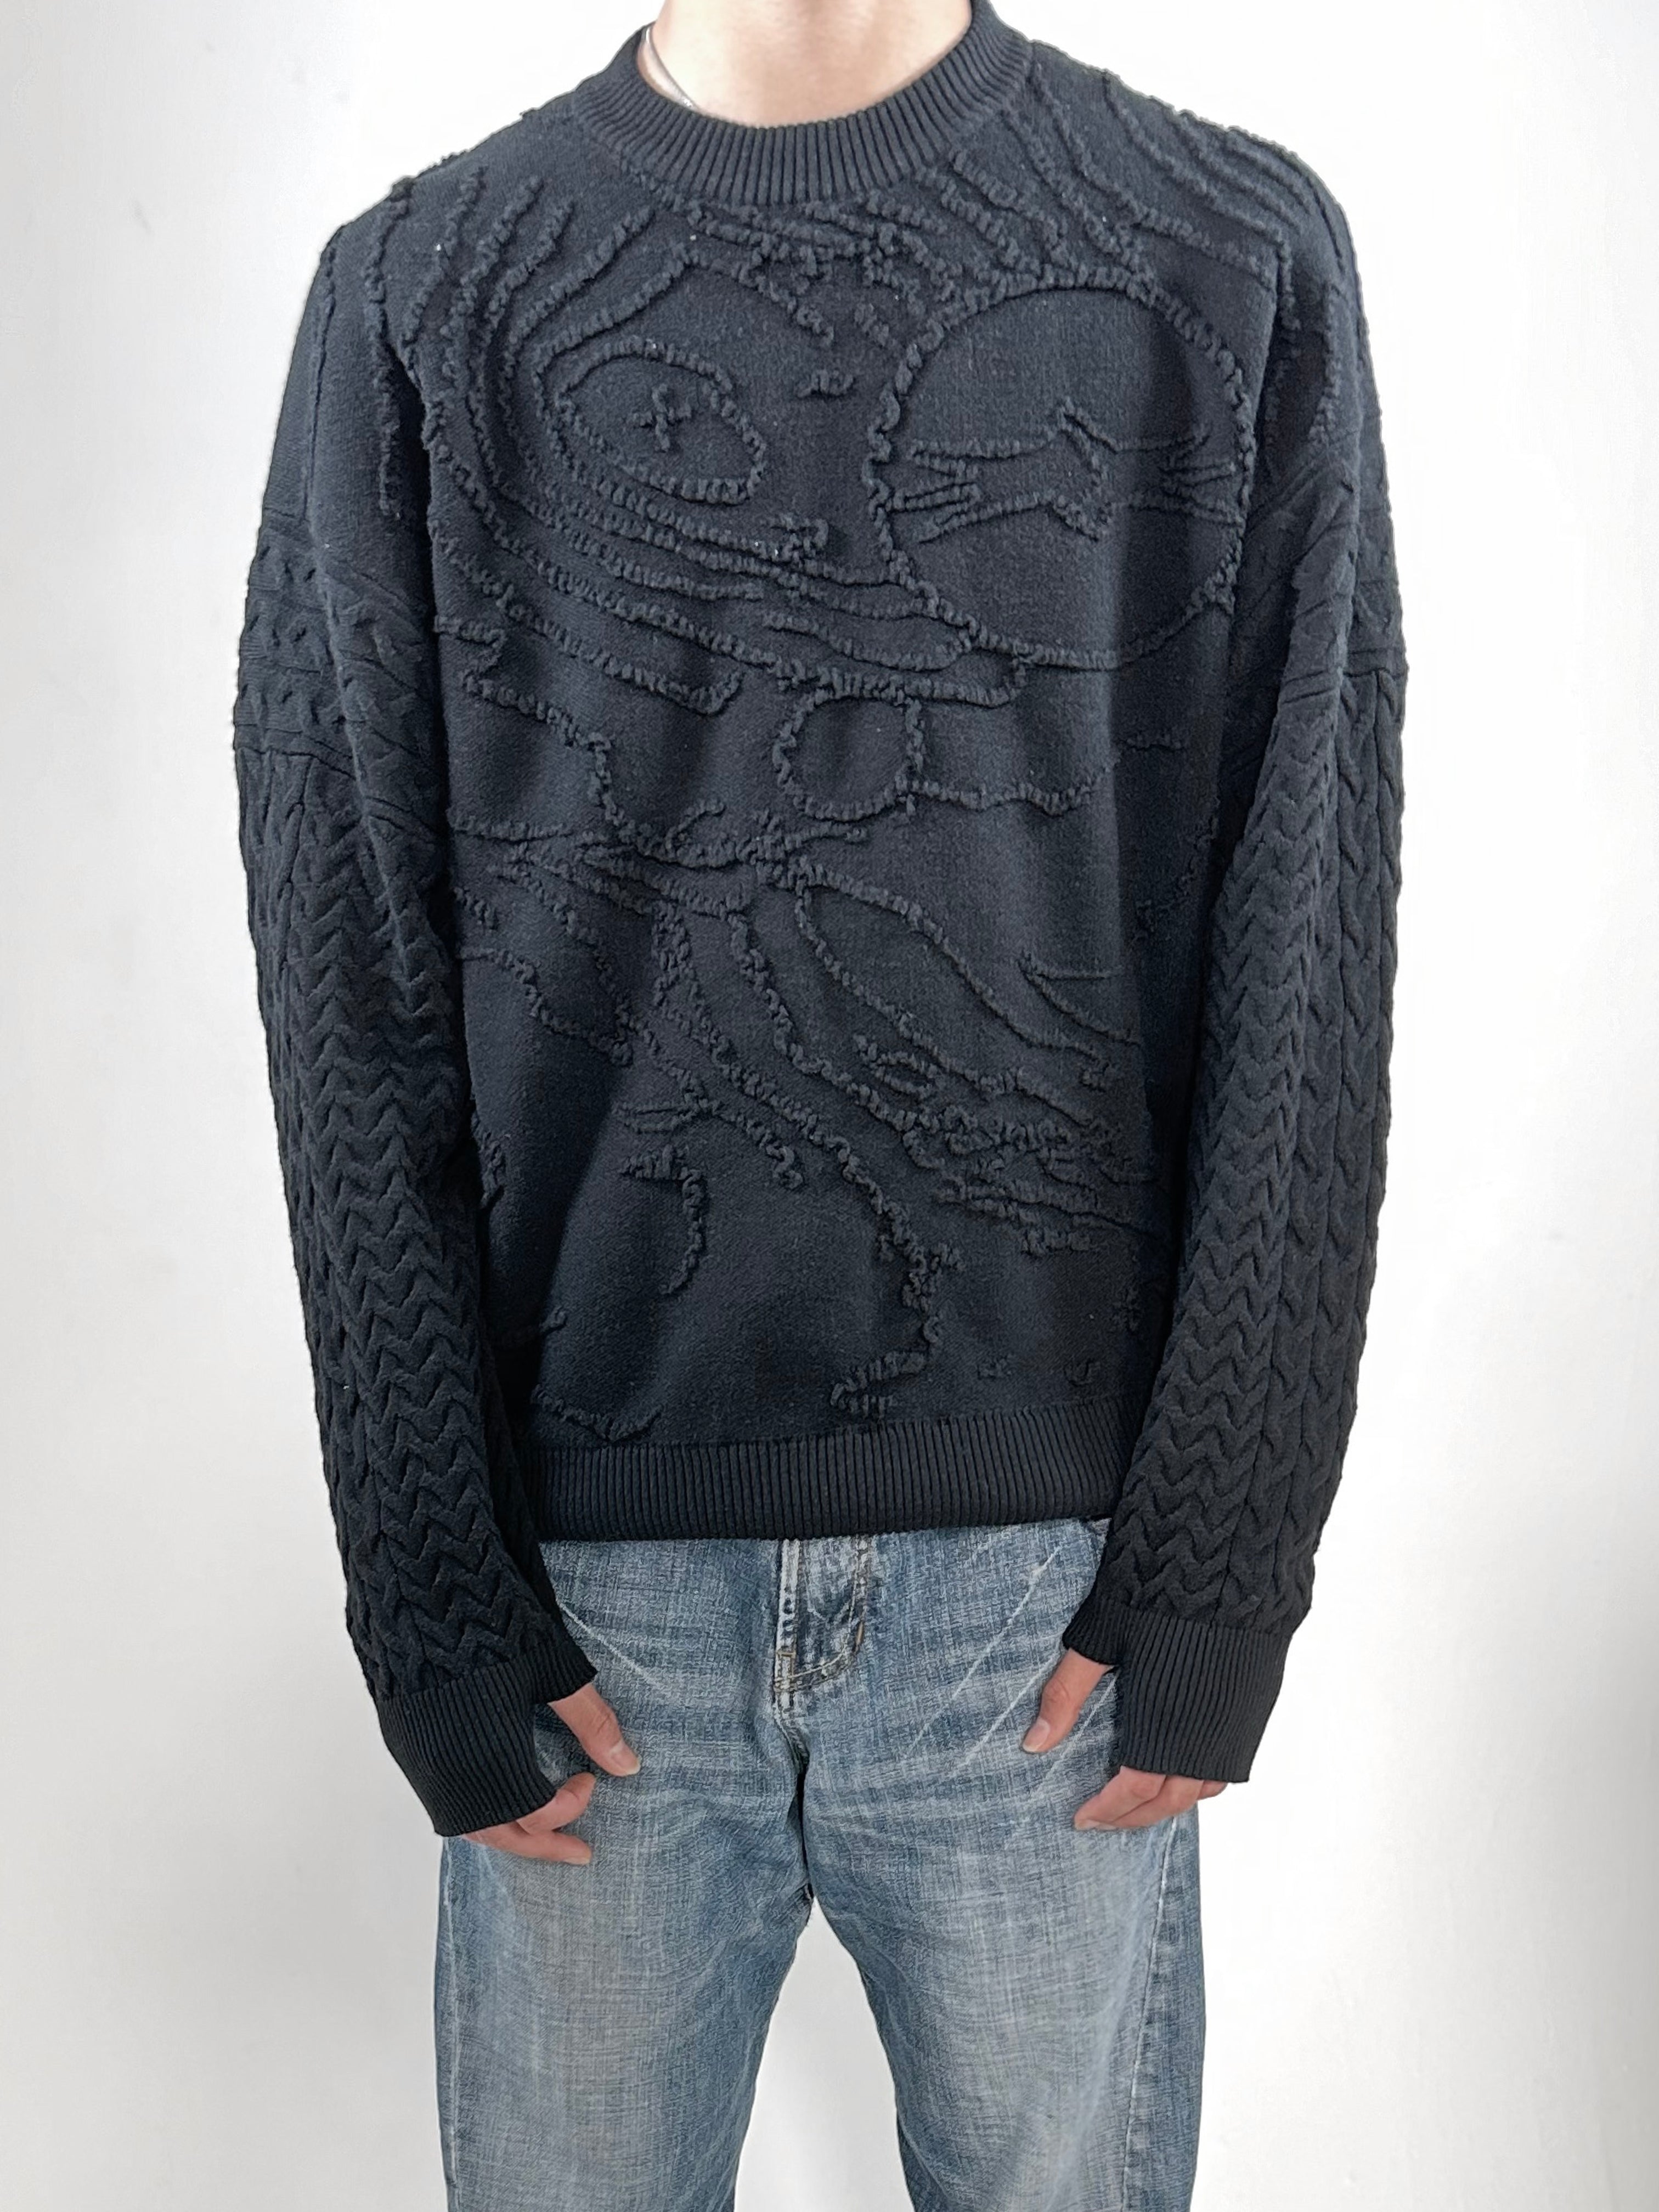 TERRAIN CABLE KNIT SWEATER IN BLACK